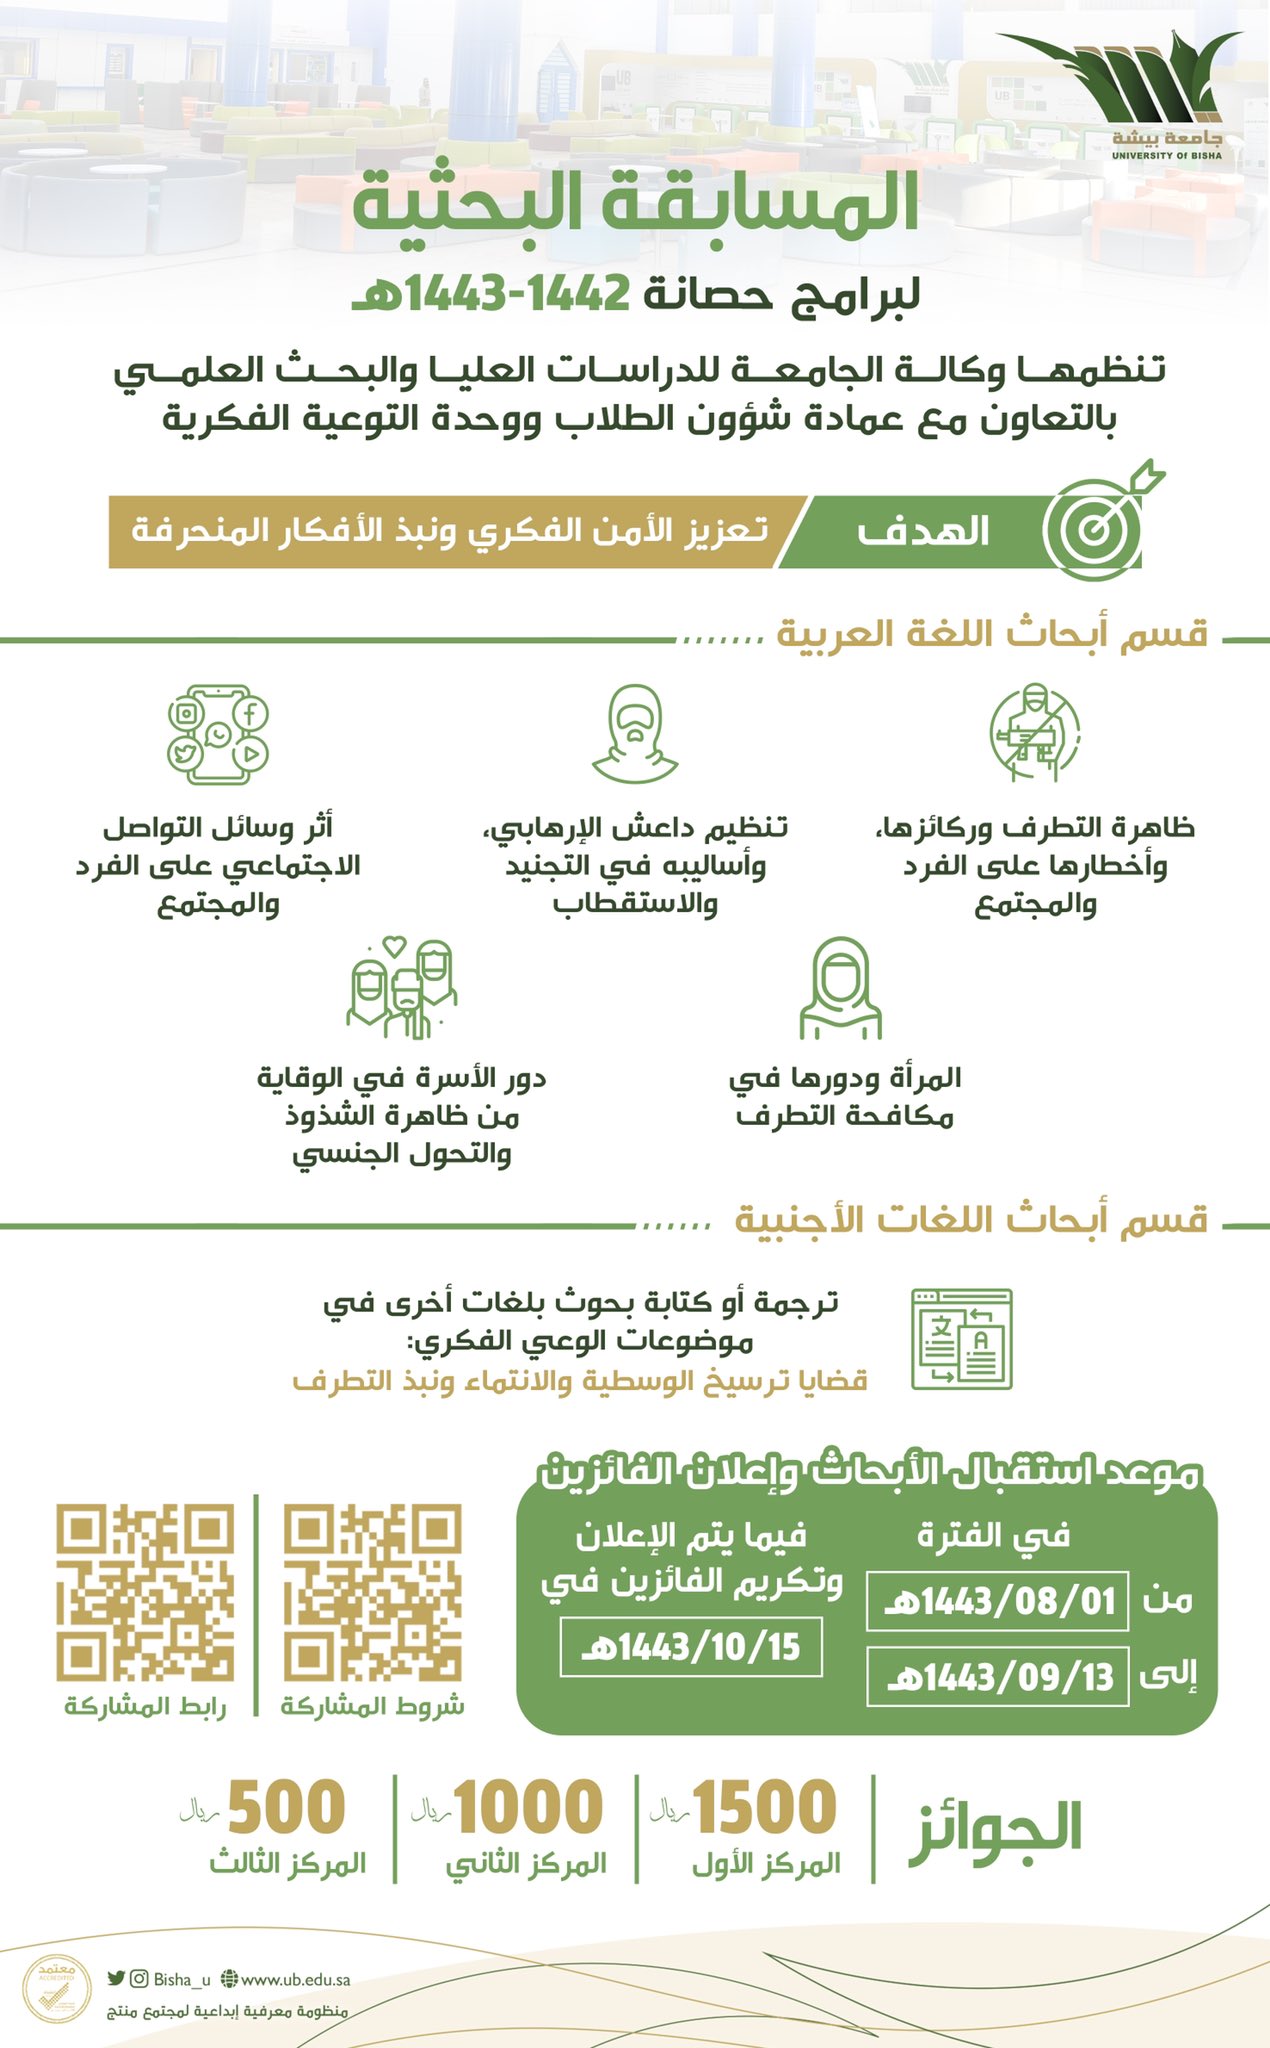 The Deanship of Scientific Research announces a research competition for students of  UniversityBisha  entitled “Immunity”